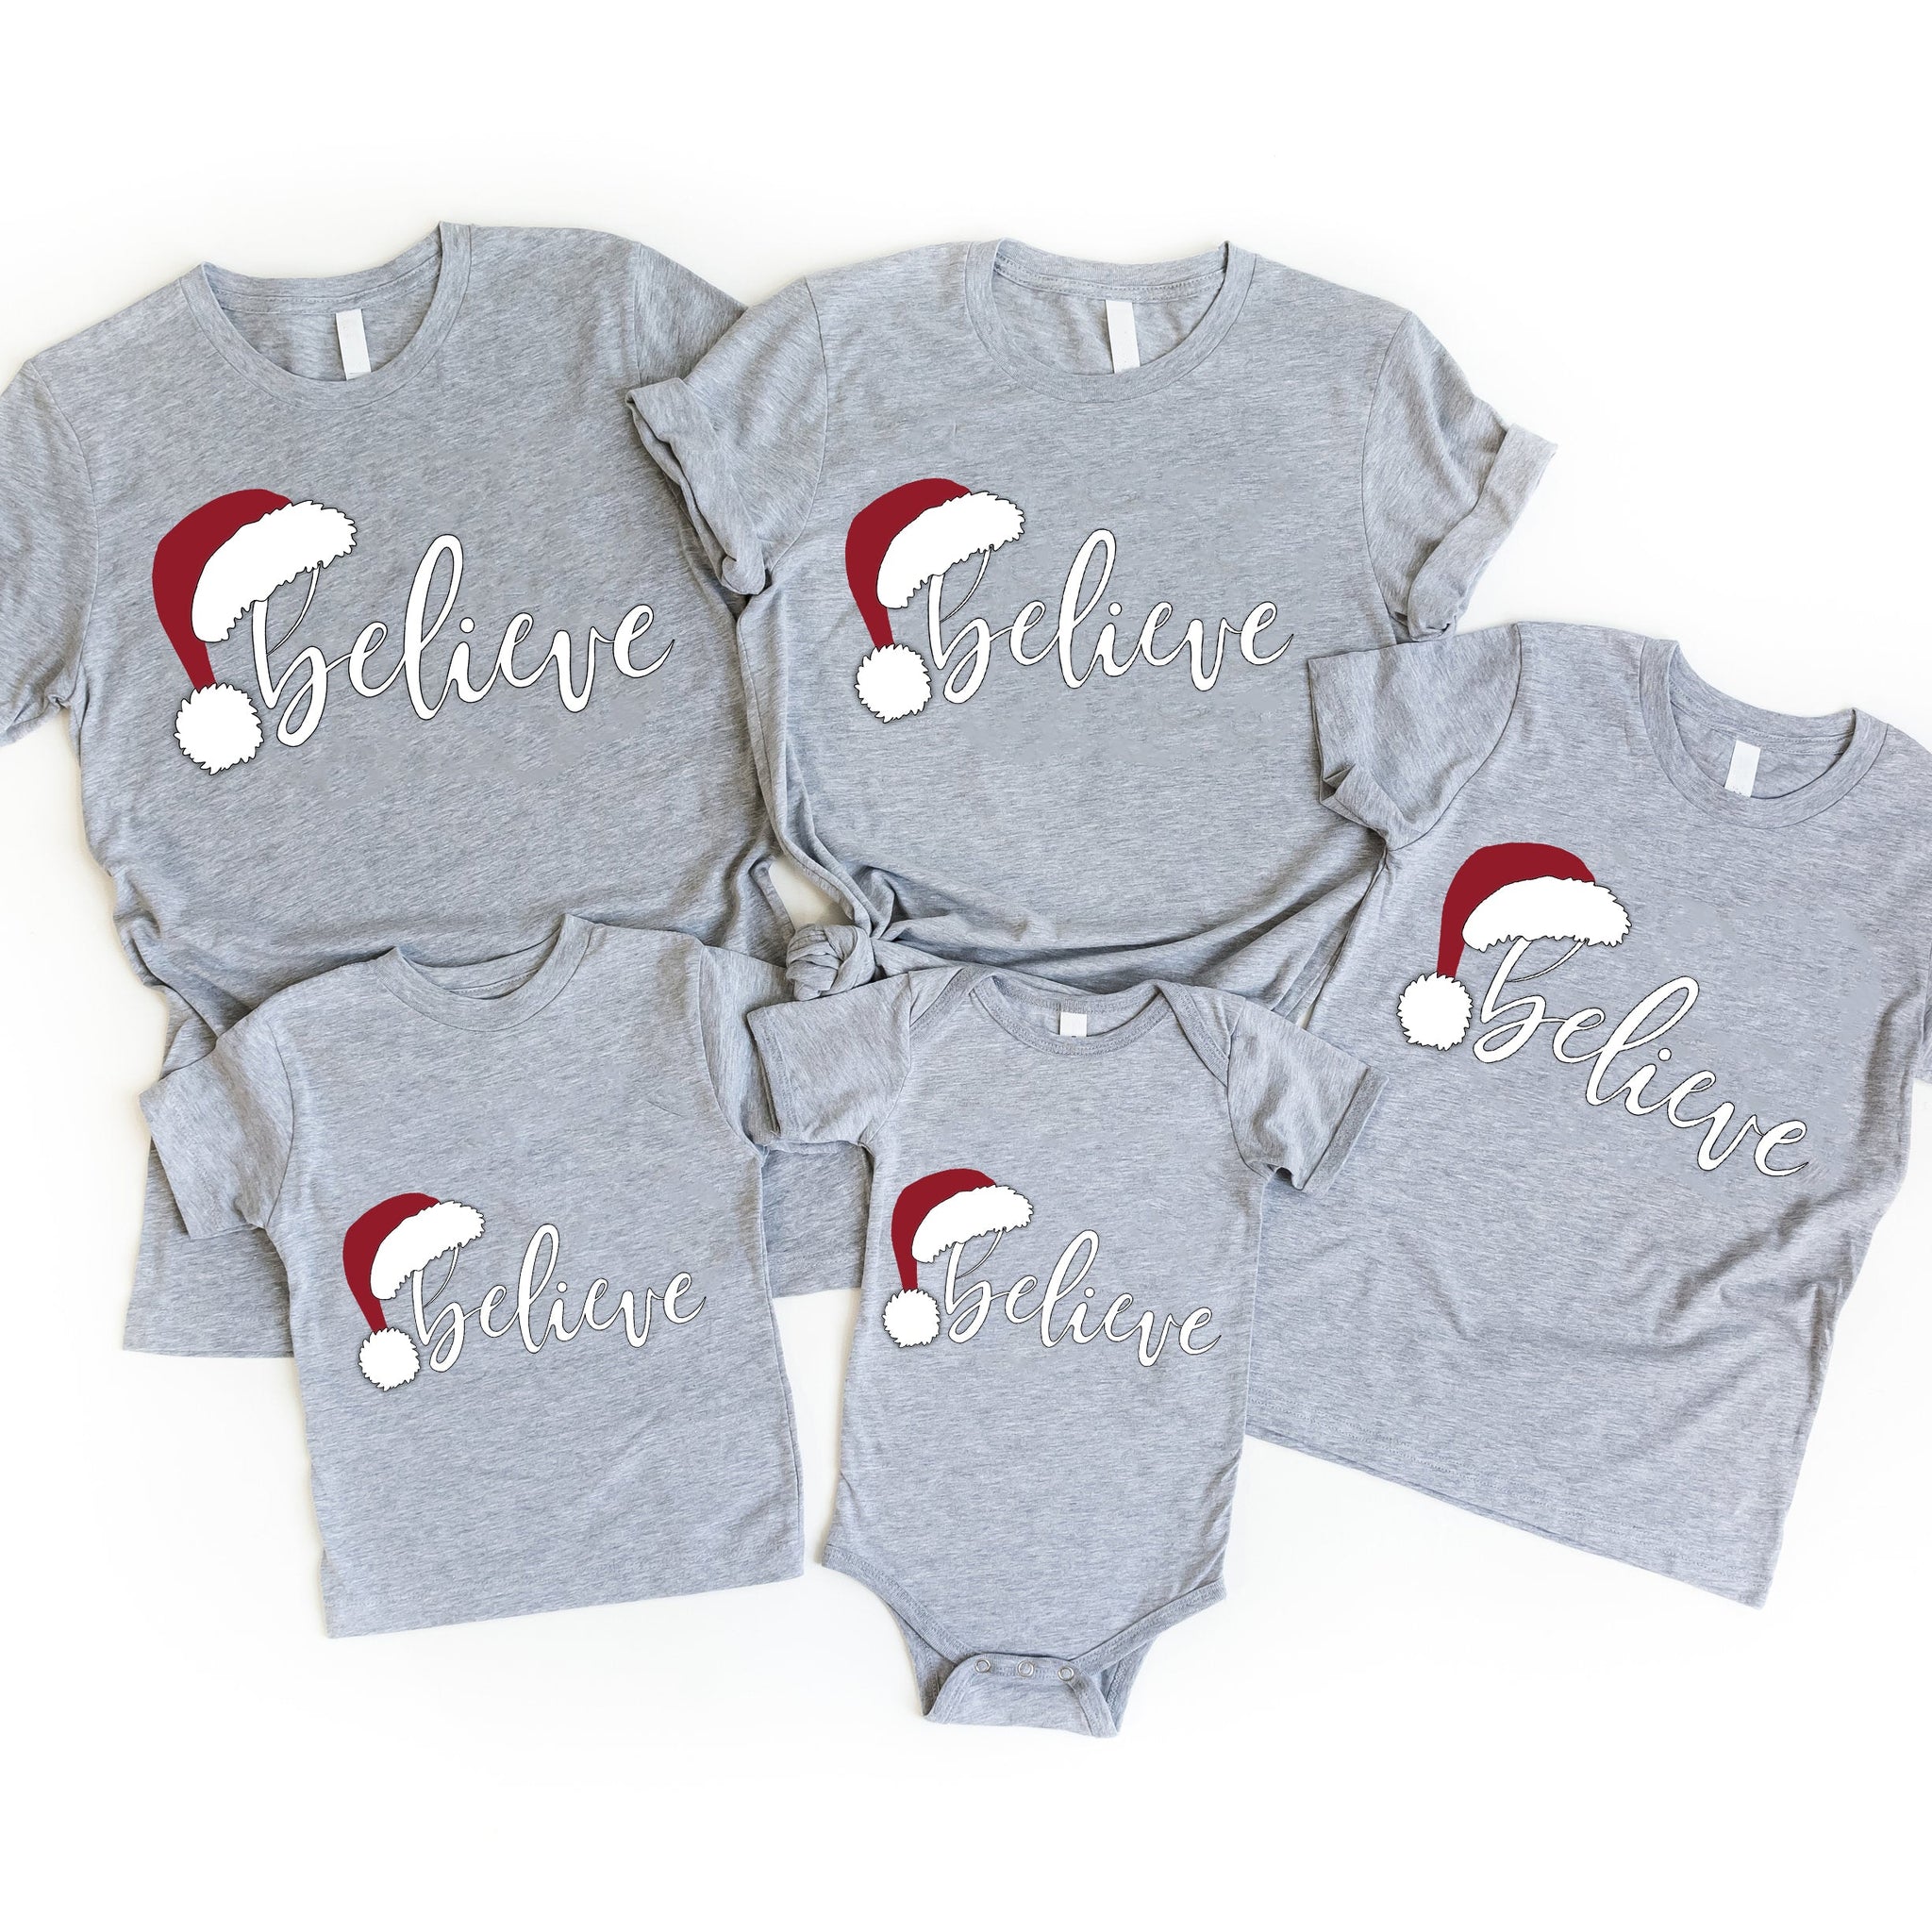 "BELIEVE" Letter Pattern Family Christmas Matching Pajamas Tops Cute Gray Short Sleeve T-shirt With Dog Bandana